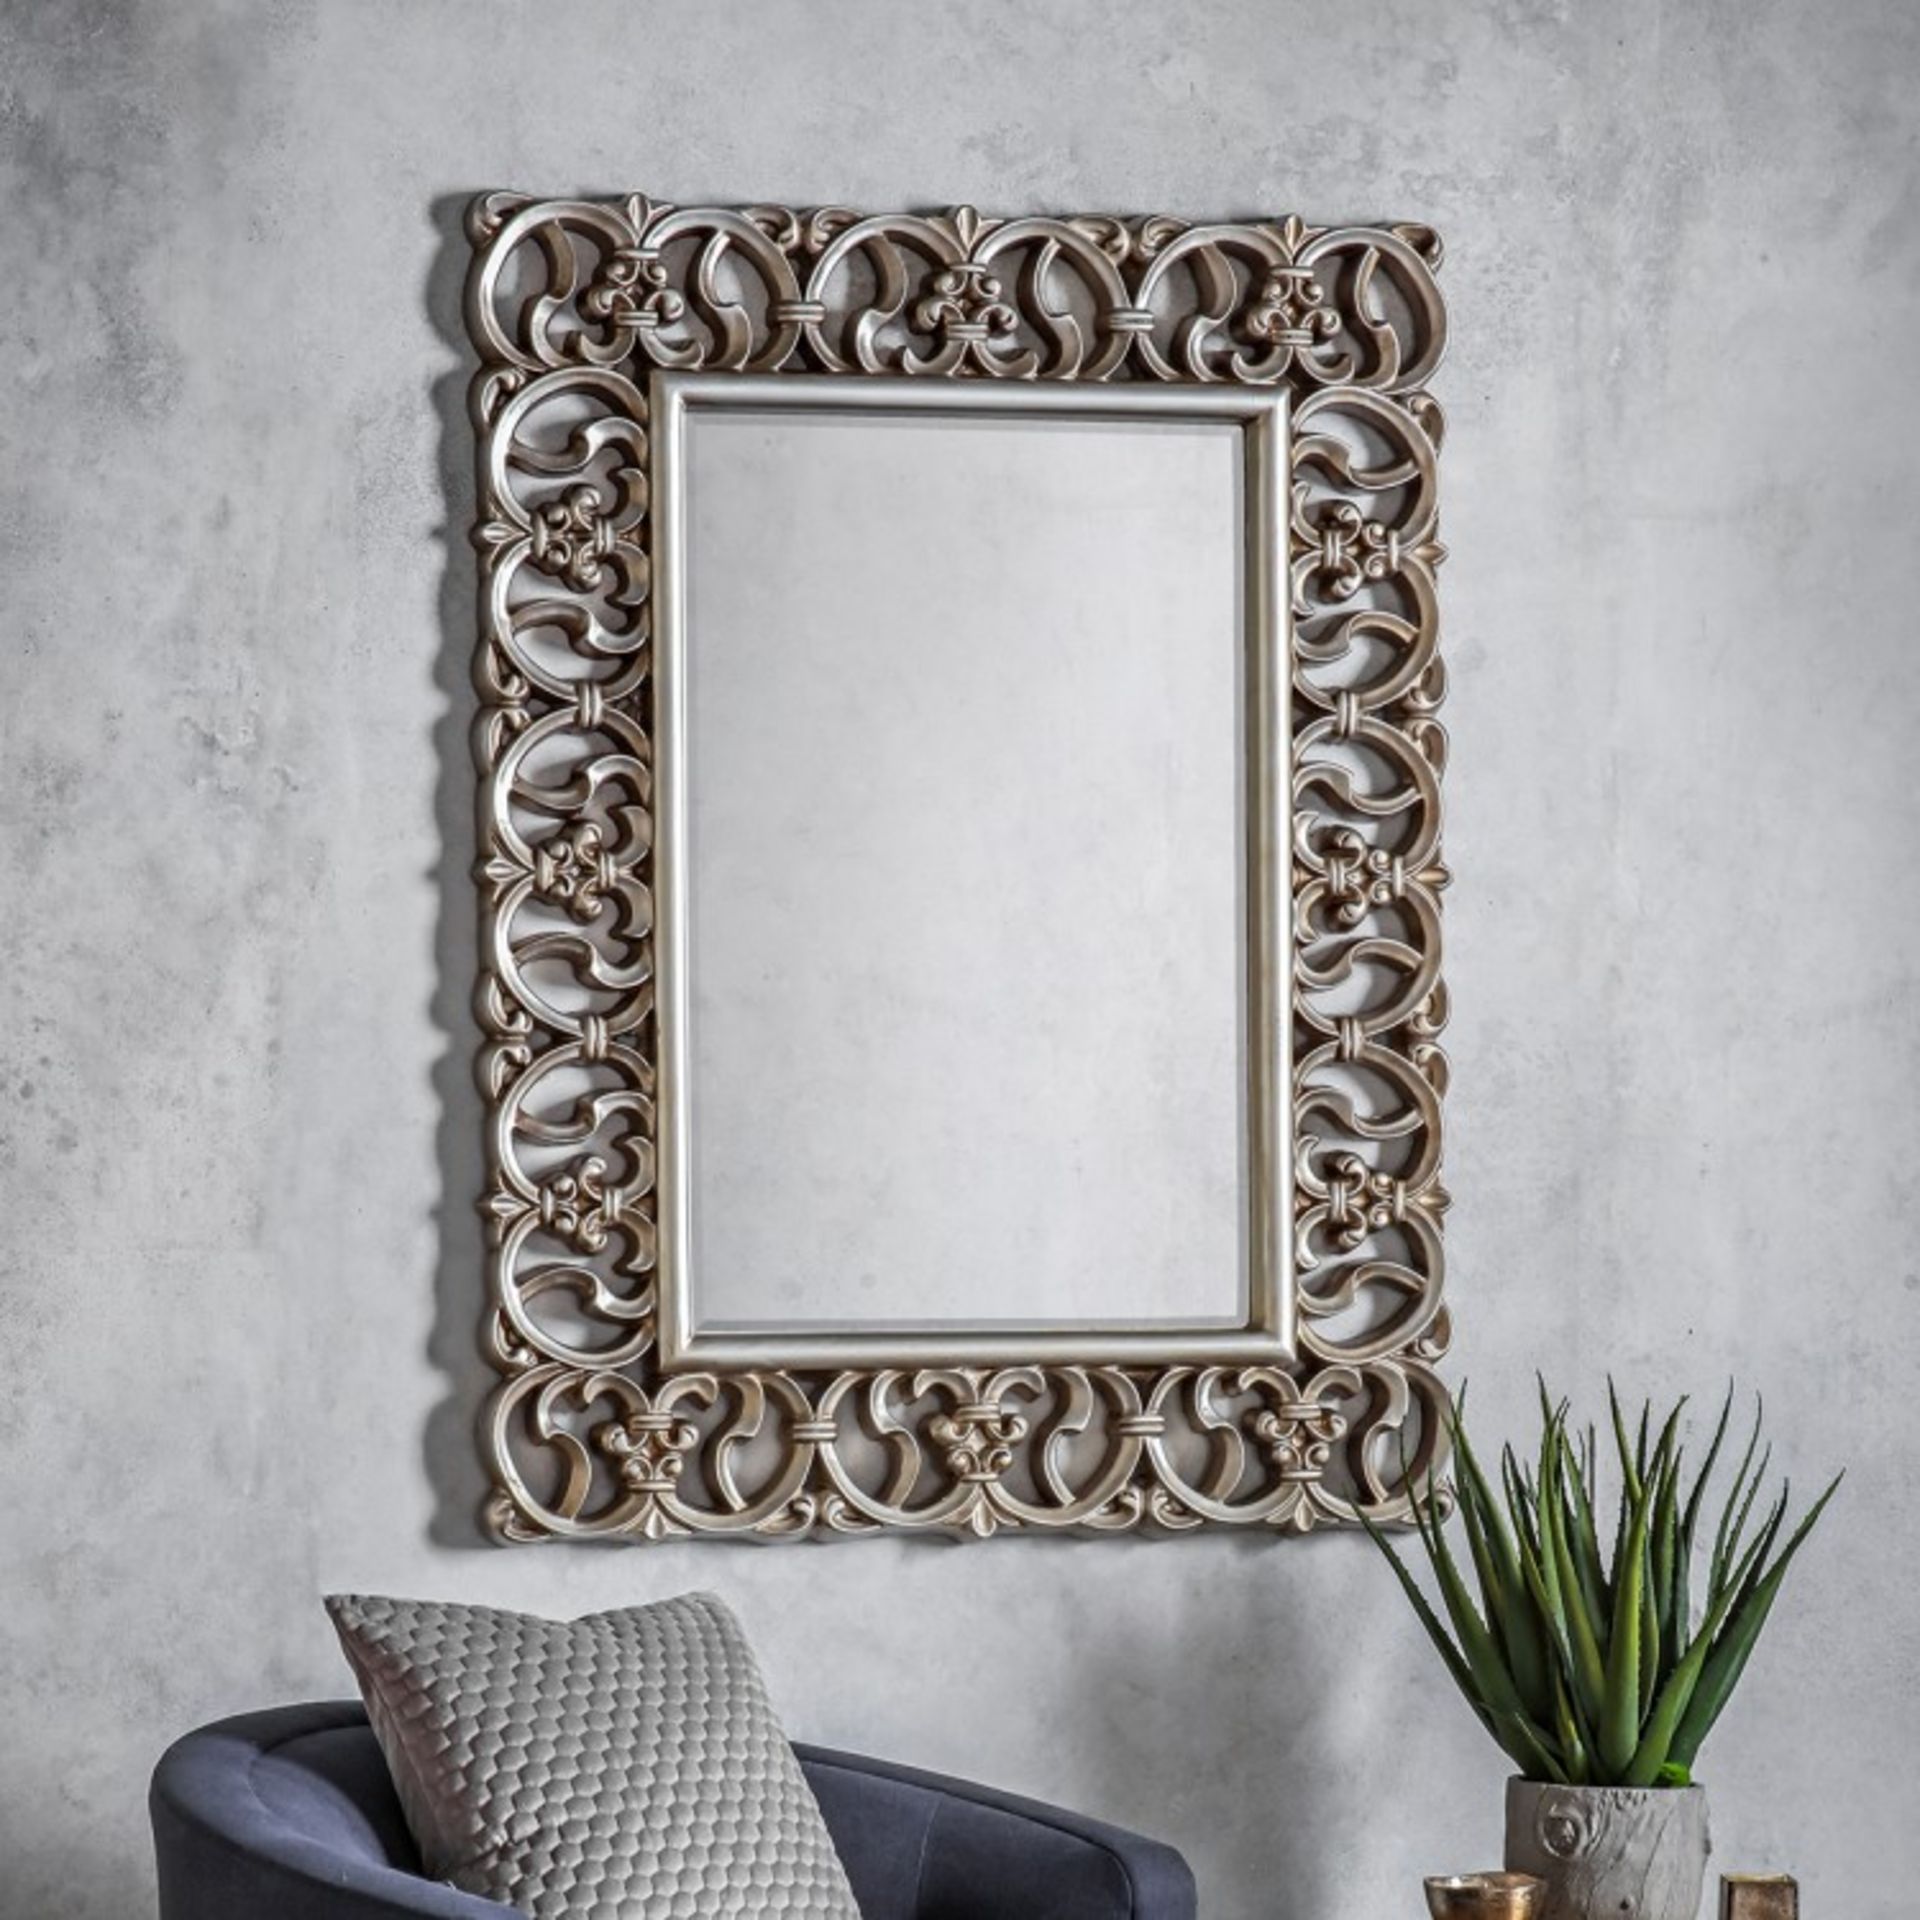 Sumner Mirror Bold statement piece with a deep decorative frame in an antique silver finishW930 x